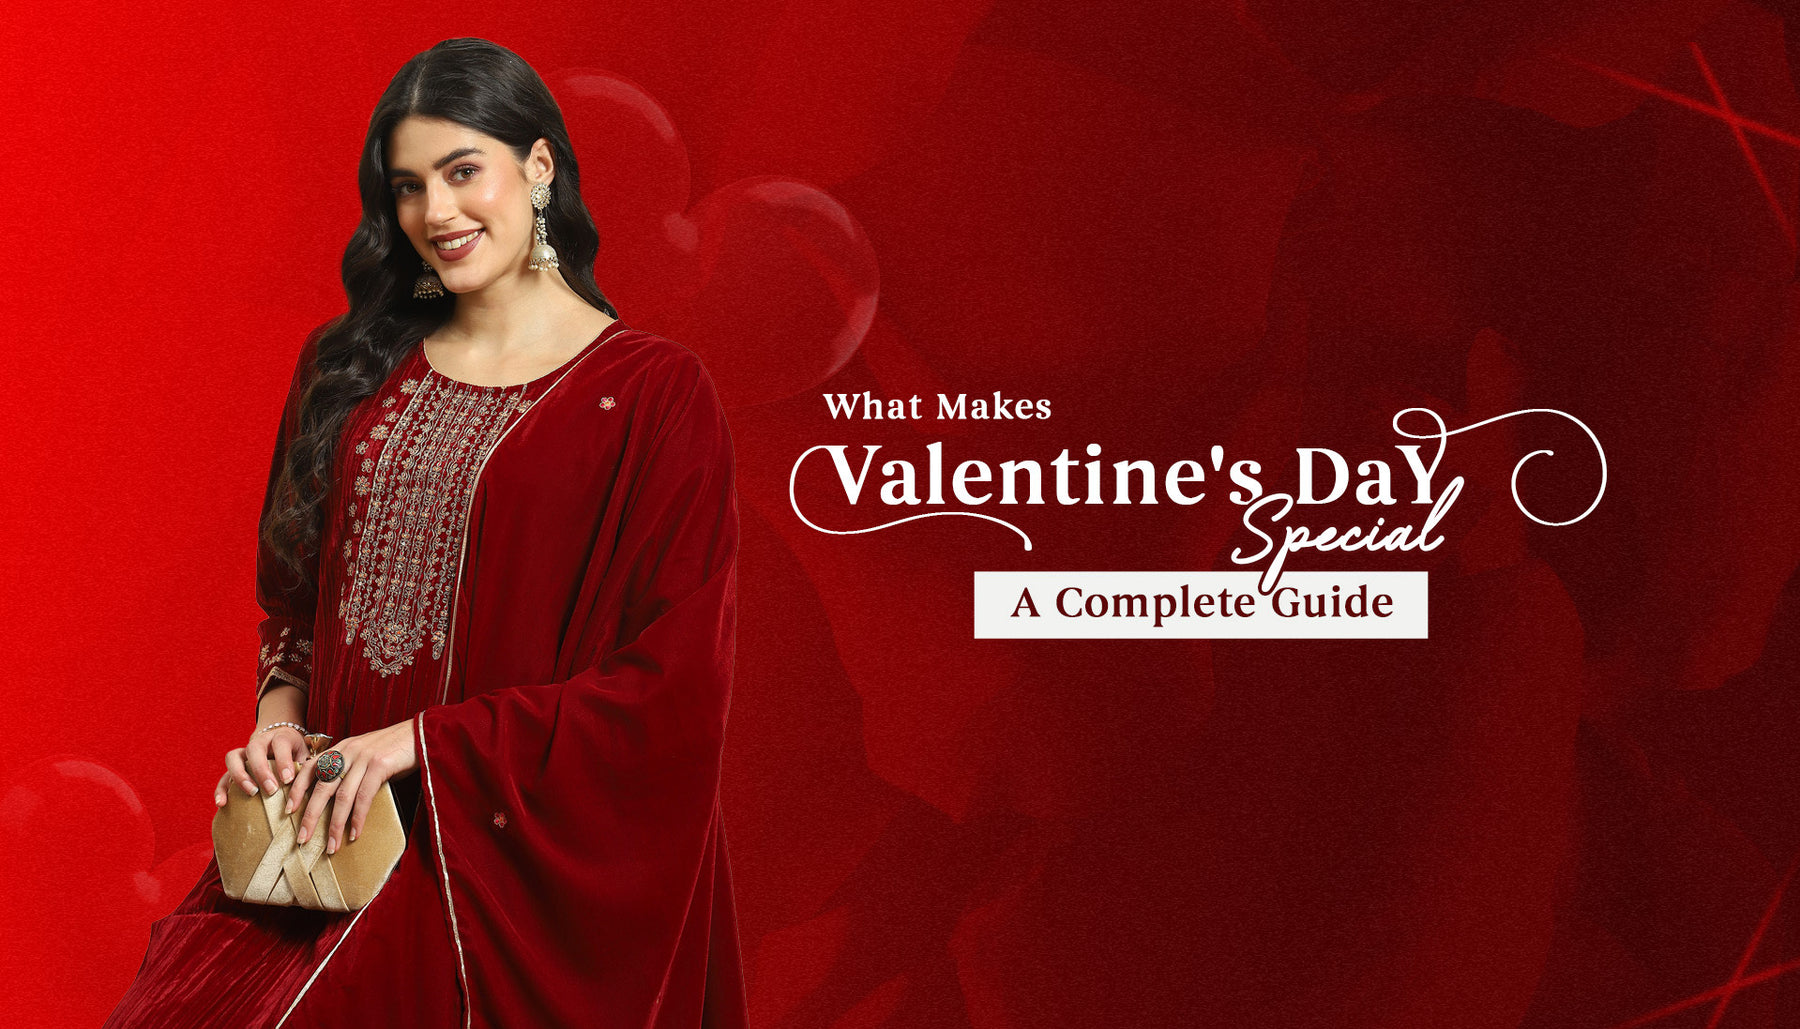 What Makes Valentine’s Day Special – A Complete Guide